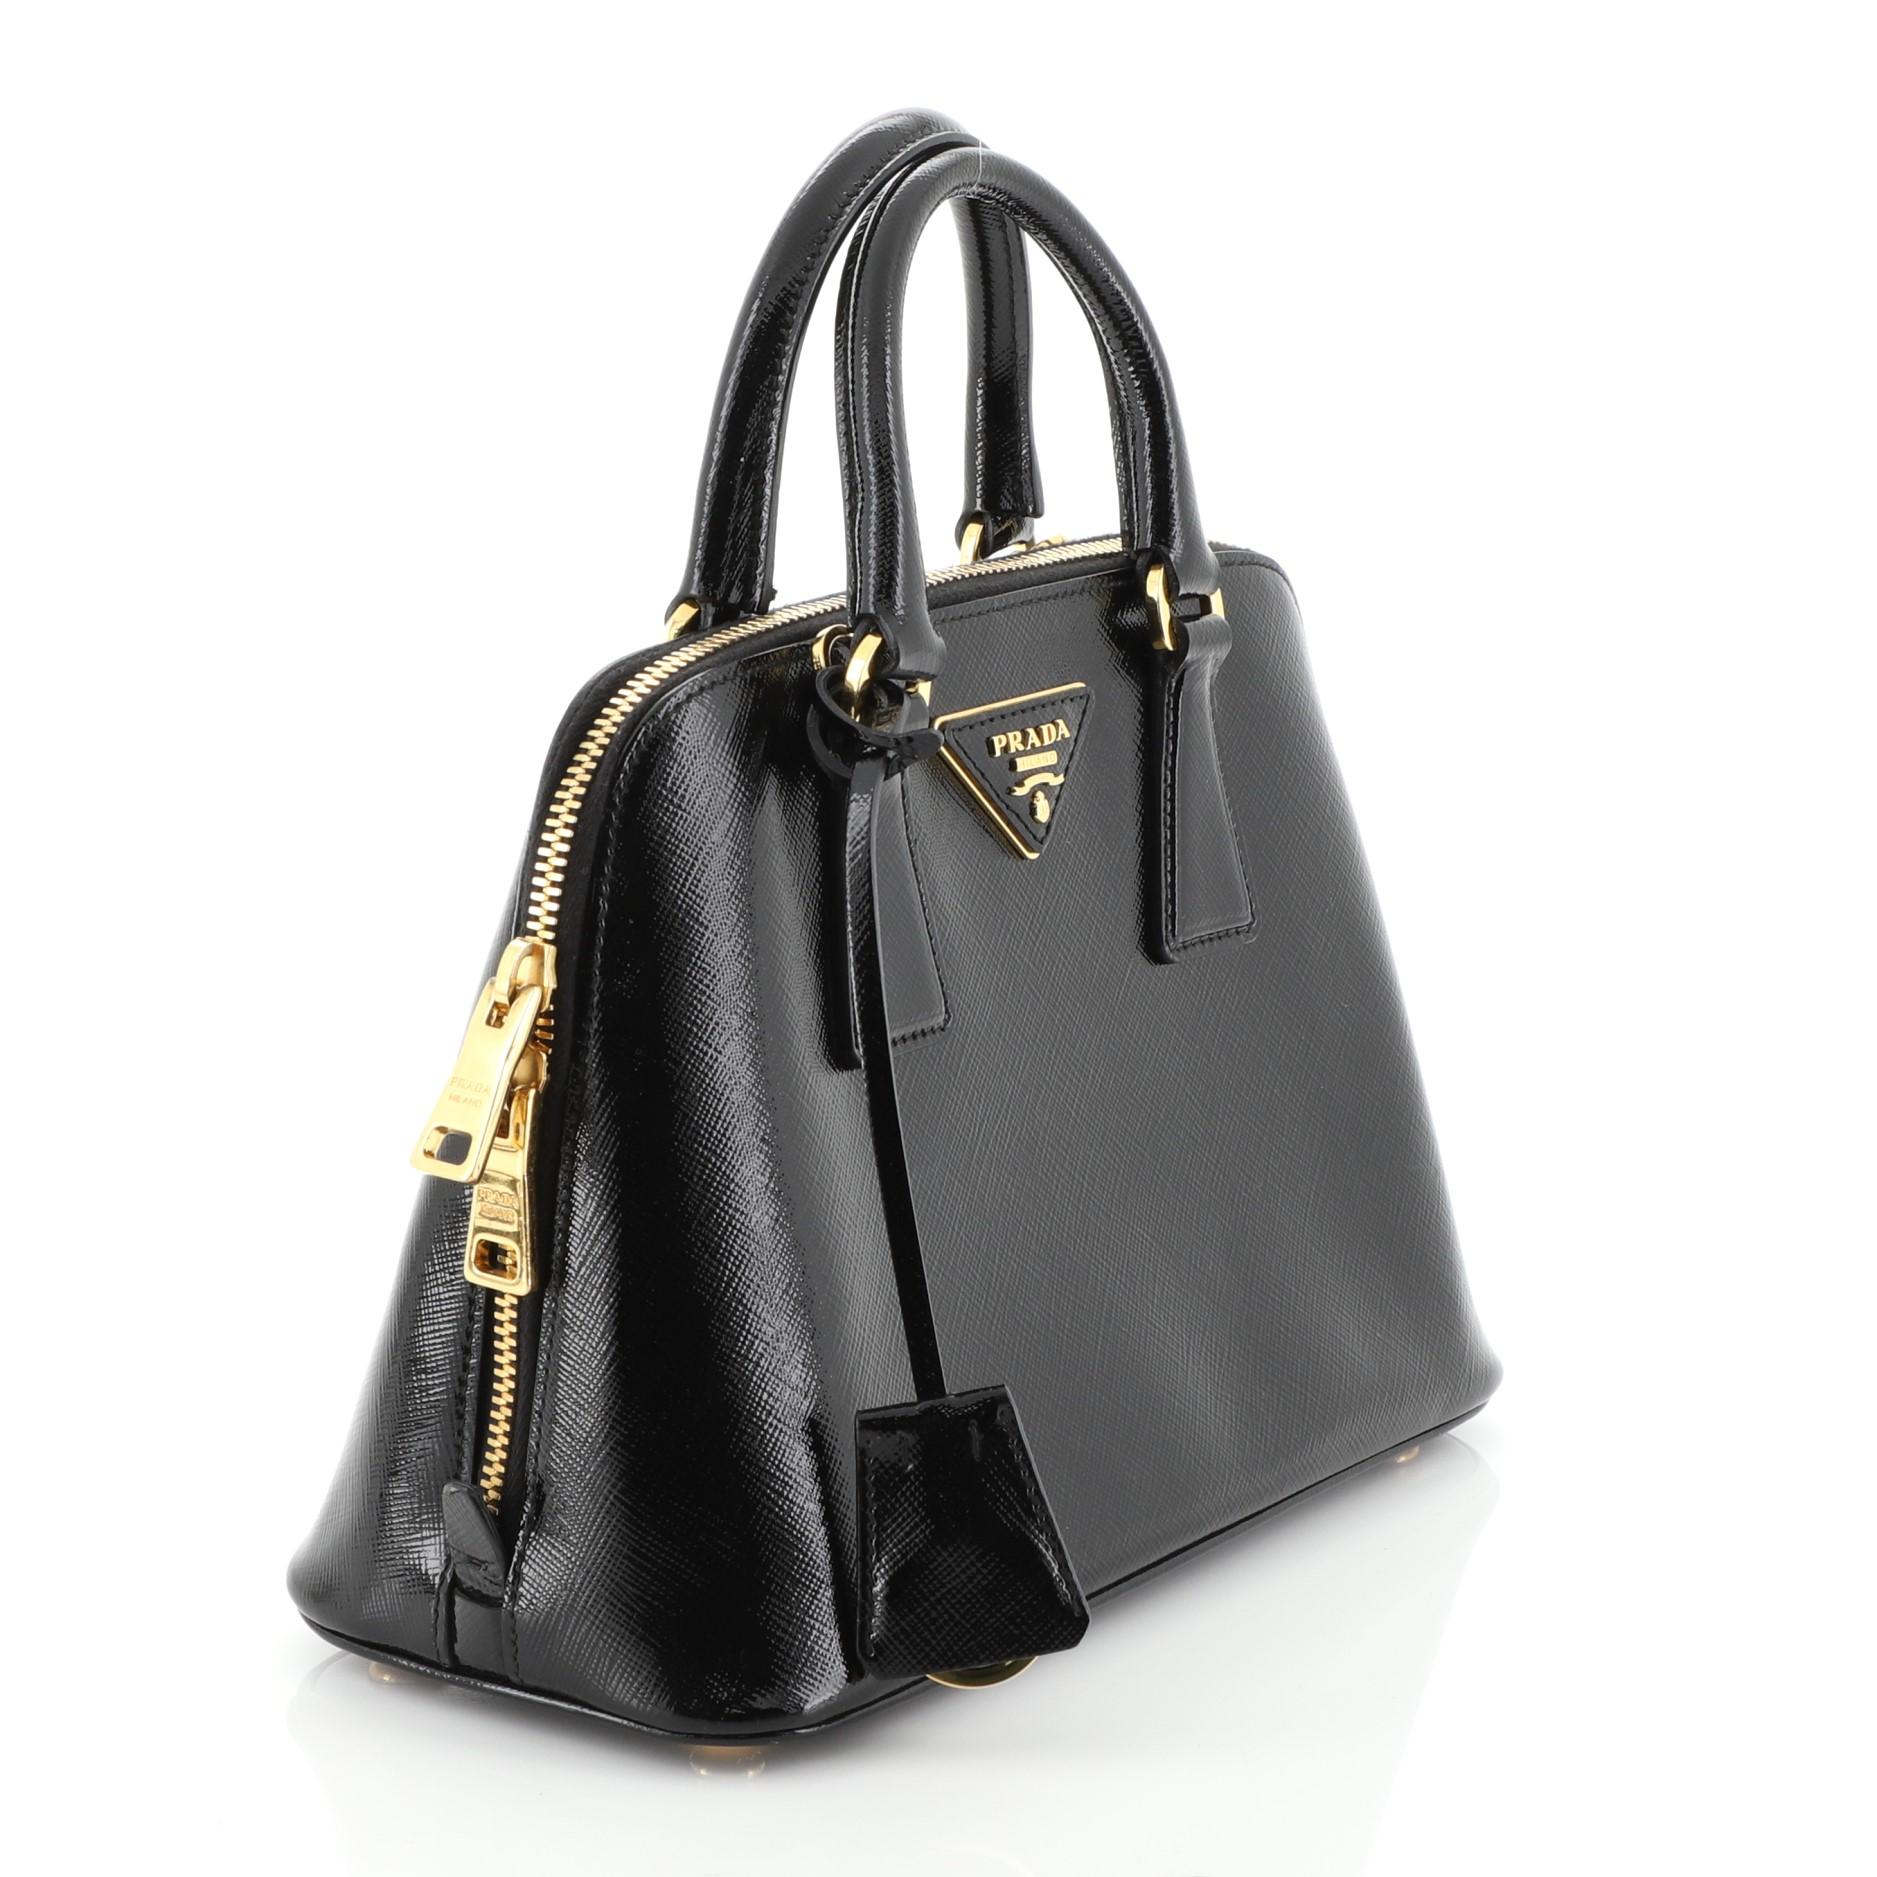 This Prada Promenade Bag Vernice Saffiano Leather Small, crafted from black vernice saffiano leather, features dual rolled handles, protective base studs and gold-tone hardware. Its zip closure opens to a black fabric interior divided into two